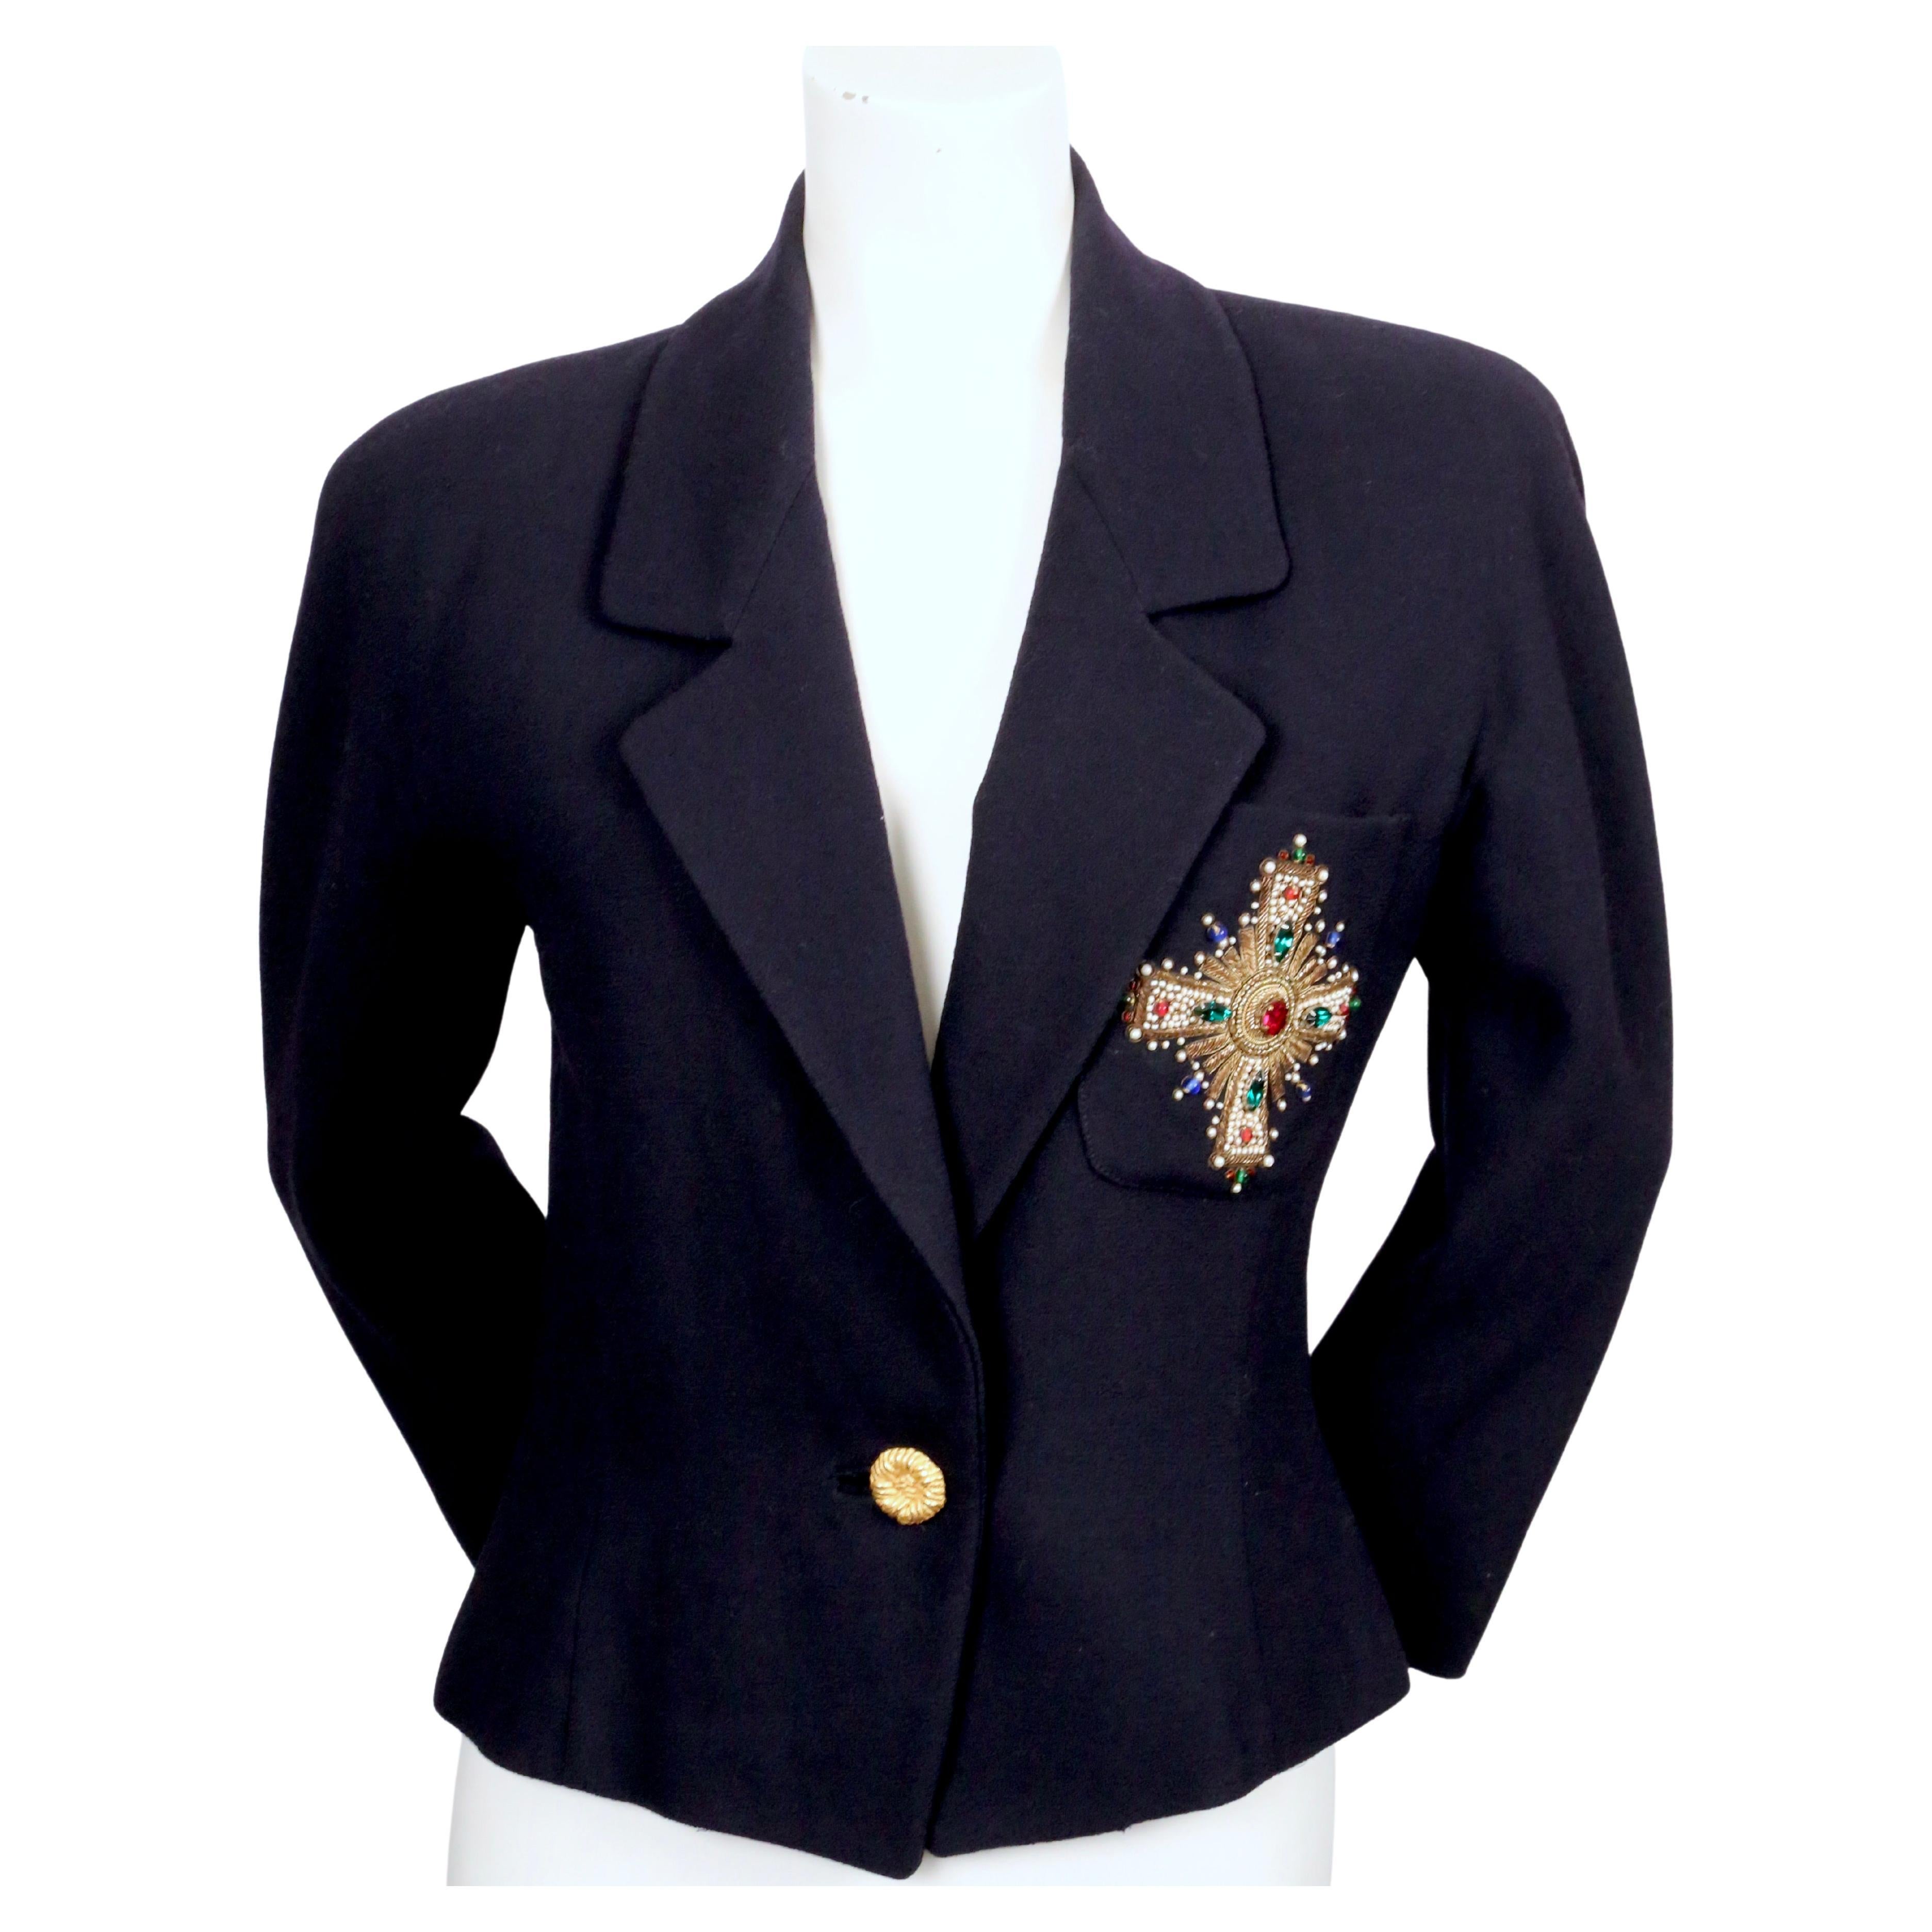 Dark navy blue wool jacket with jeweled Byzantine-style cross detail by Anne Klein dating to the late 1980's. Labeled a size 4. Approximate measurements: bust 36